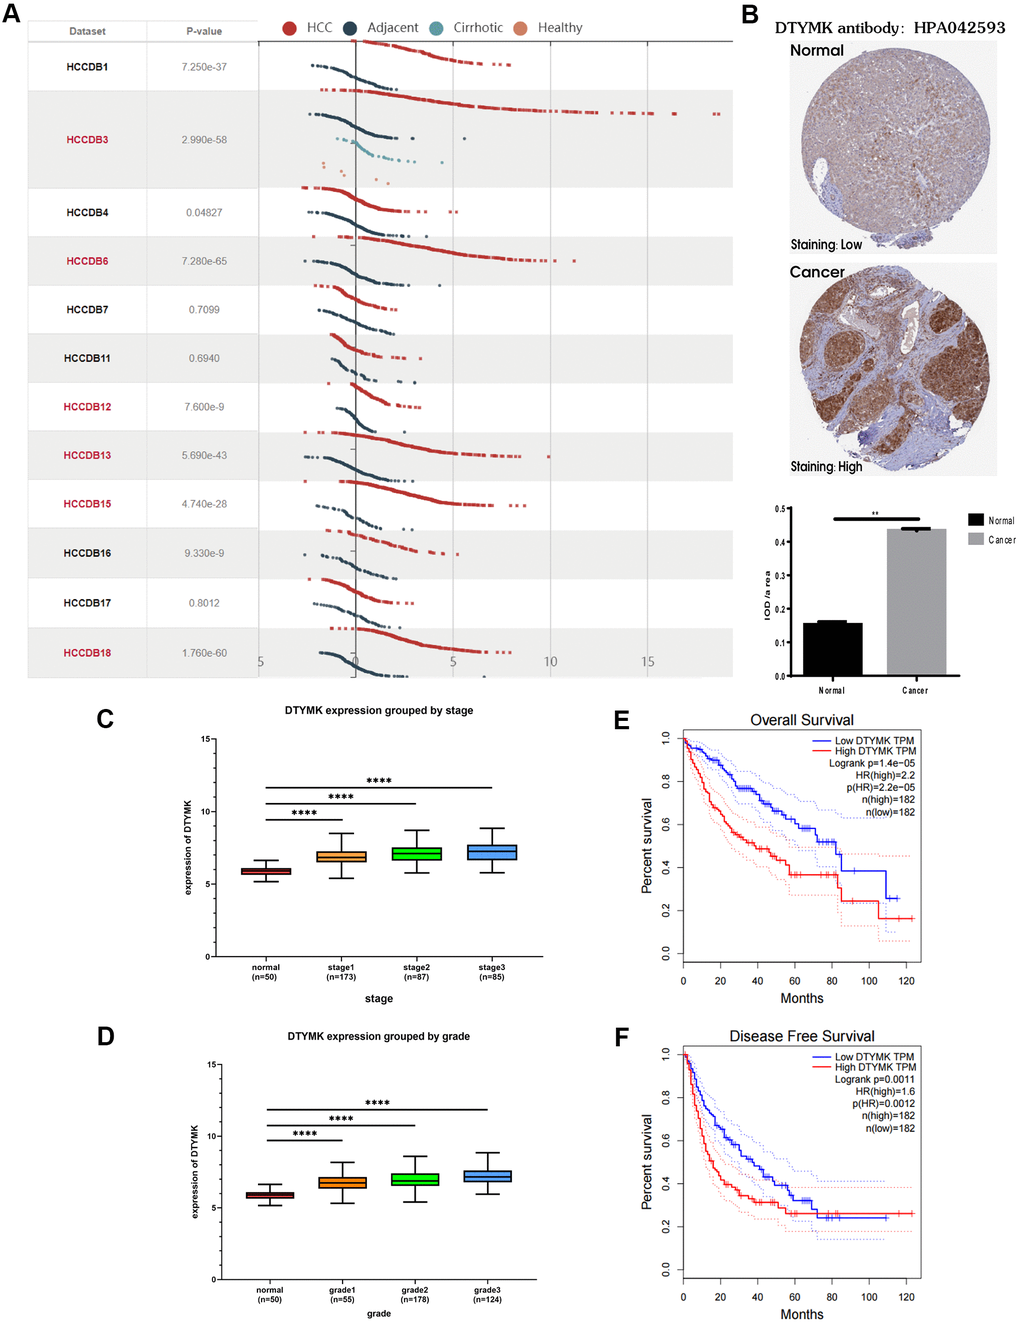 Bioinformatics analysis of DTYMK in HCC. (A) Gene expression profiles of DTYMK in the HCCDB database. (B) Representative immunohistochemistry (IHC) images from the HPA with the DTYMK antibody. (C) The expression level of DTYMK was positively correlated with tumor stage in HCC patients. (D) The expression level of DTYMK was positively correlated with tumor grade in HCC patients. (E) Overall survival analysis of DTYMK in GEPIA. (F) Disease free survival analysis of DTYMK in GEPIA. *** represents p 